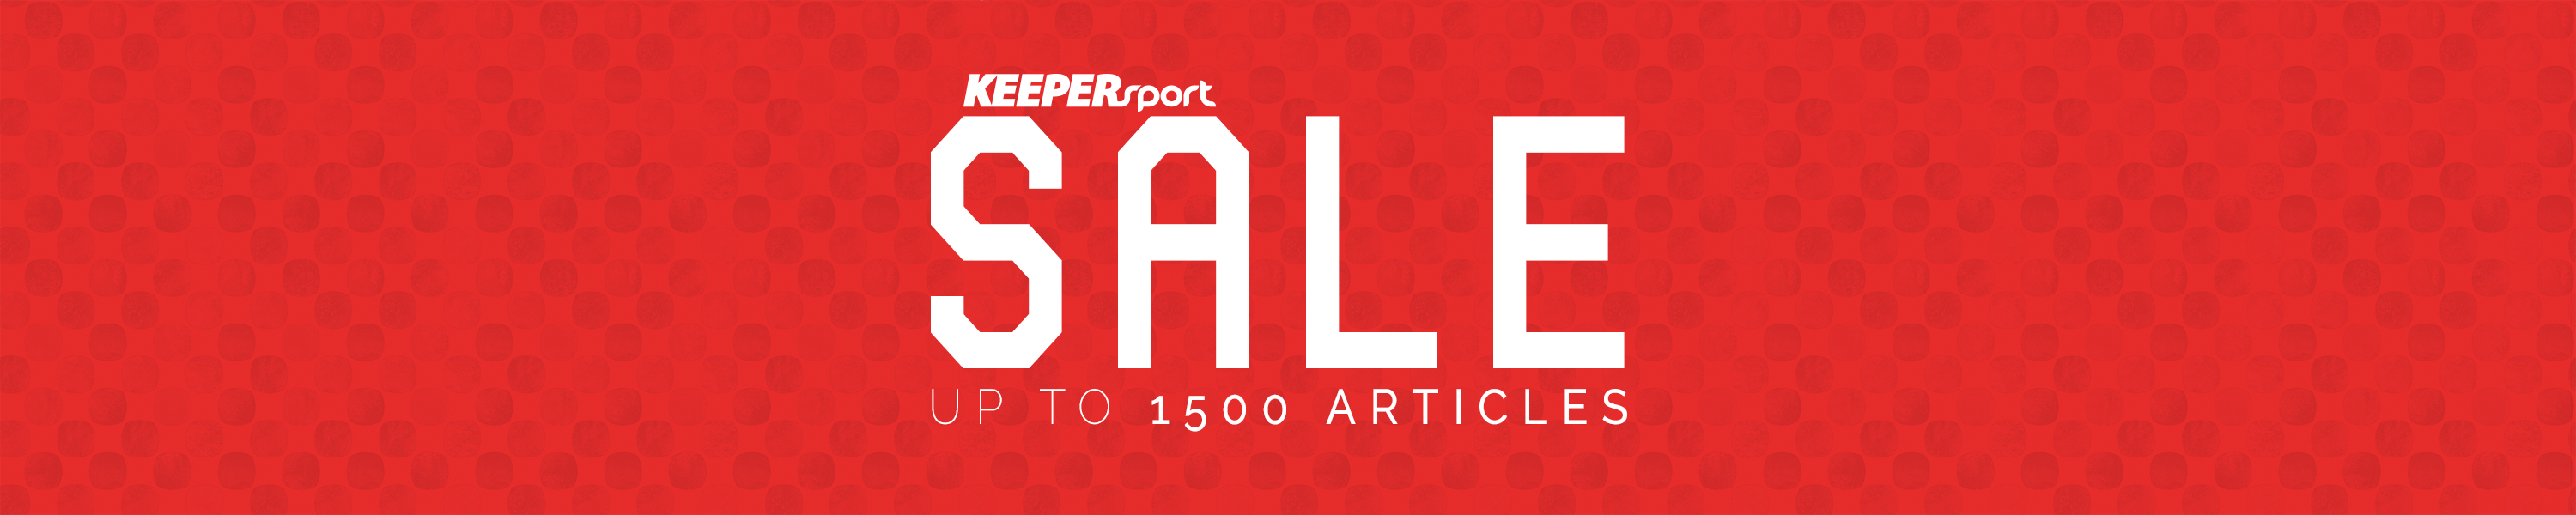 KEEPERsport SALE goalkeeper products